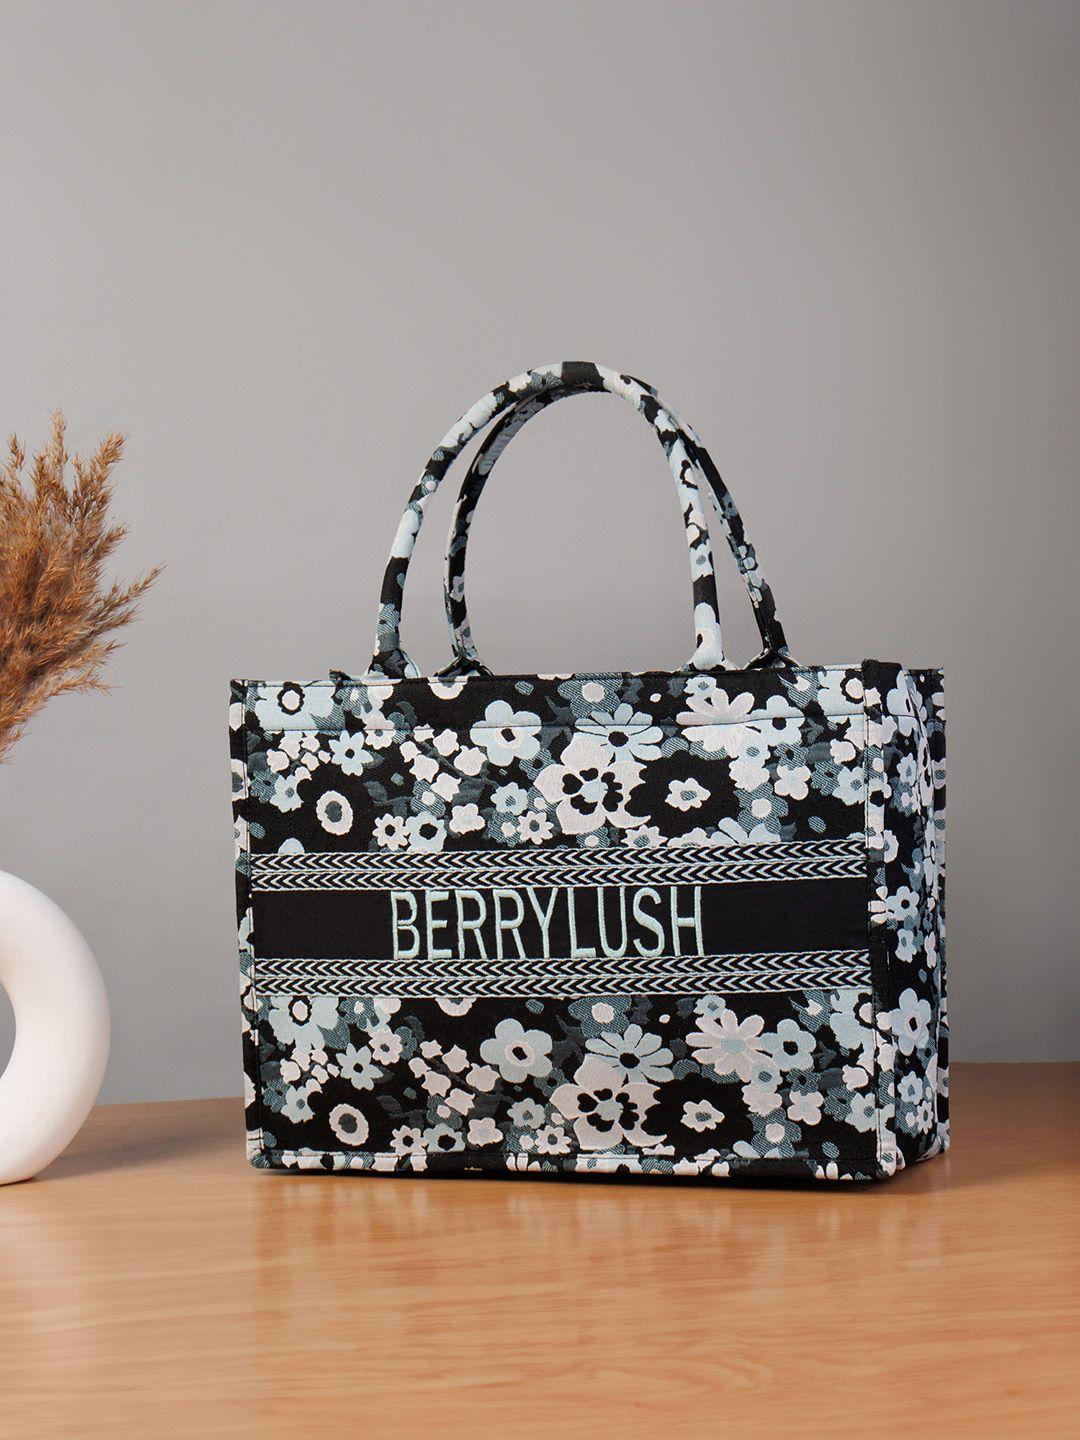 berrylush floral printed structured tote bag